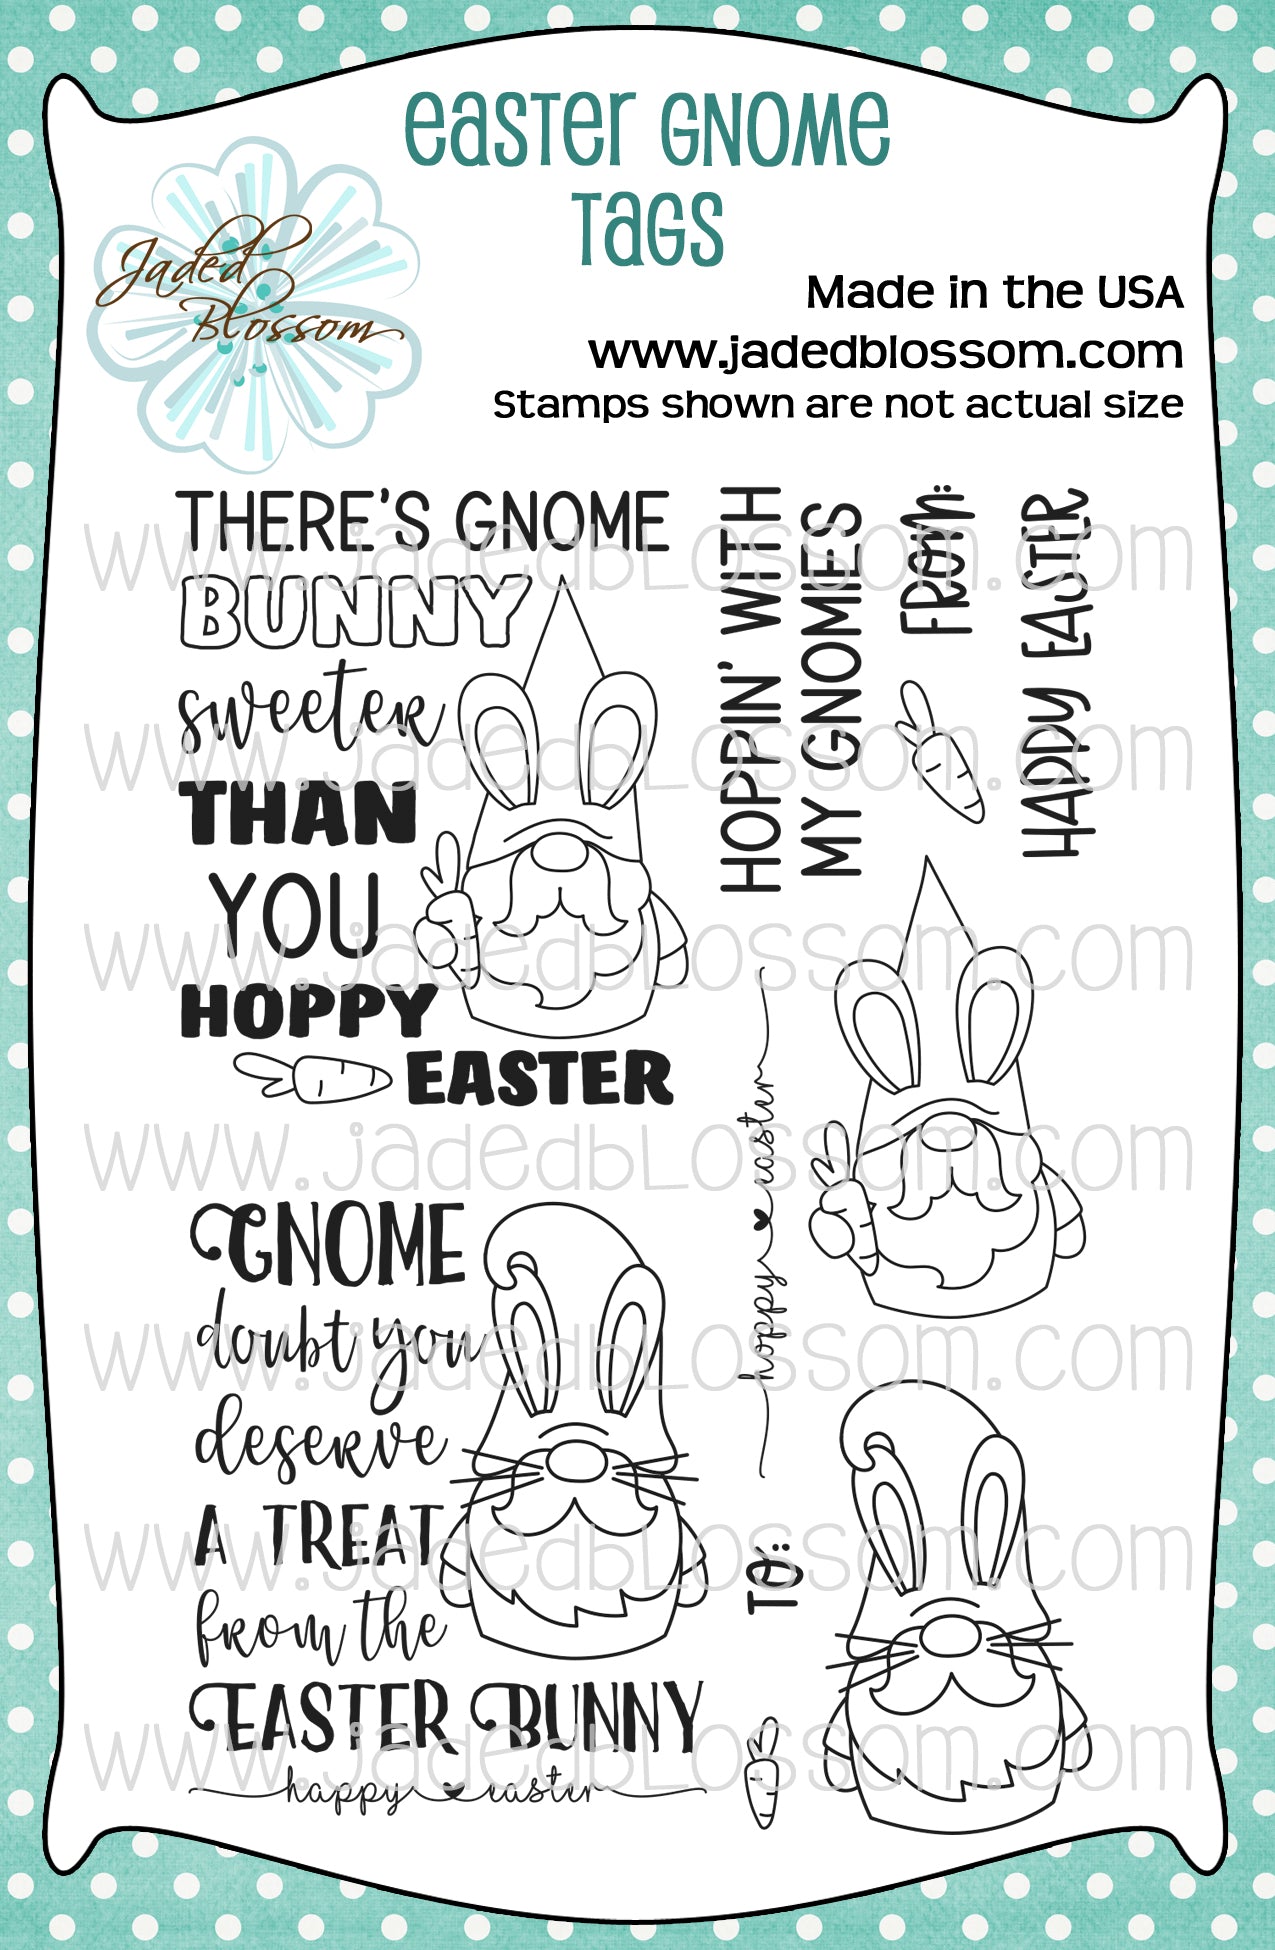 Easter Gnome Tags